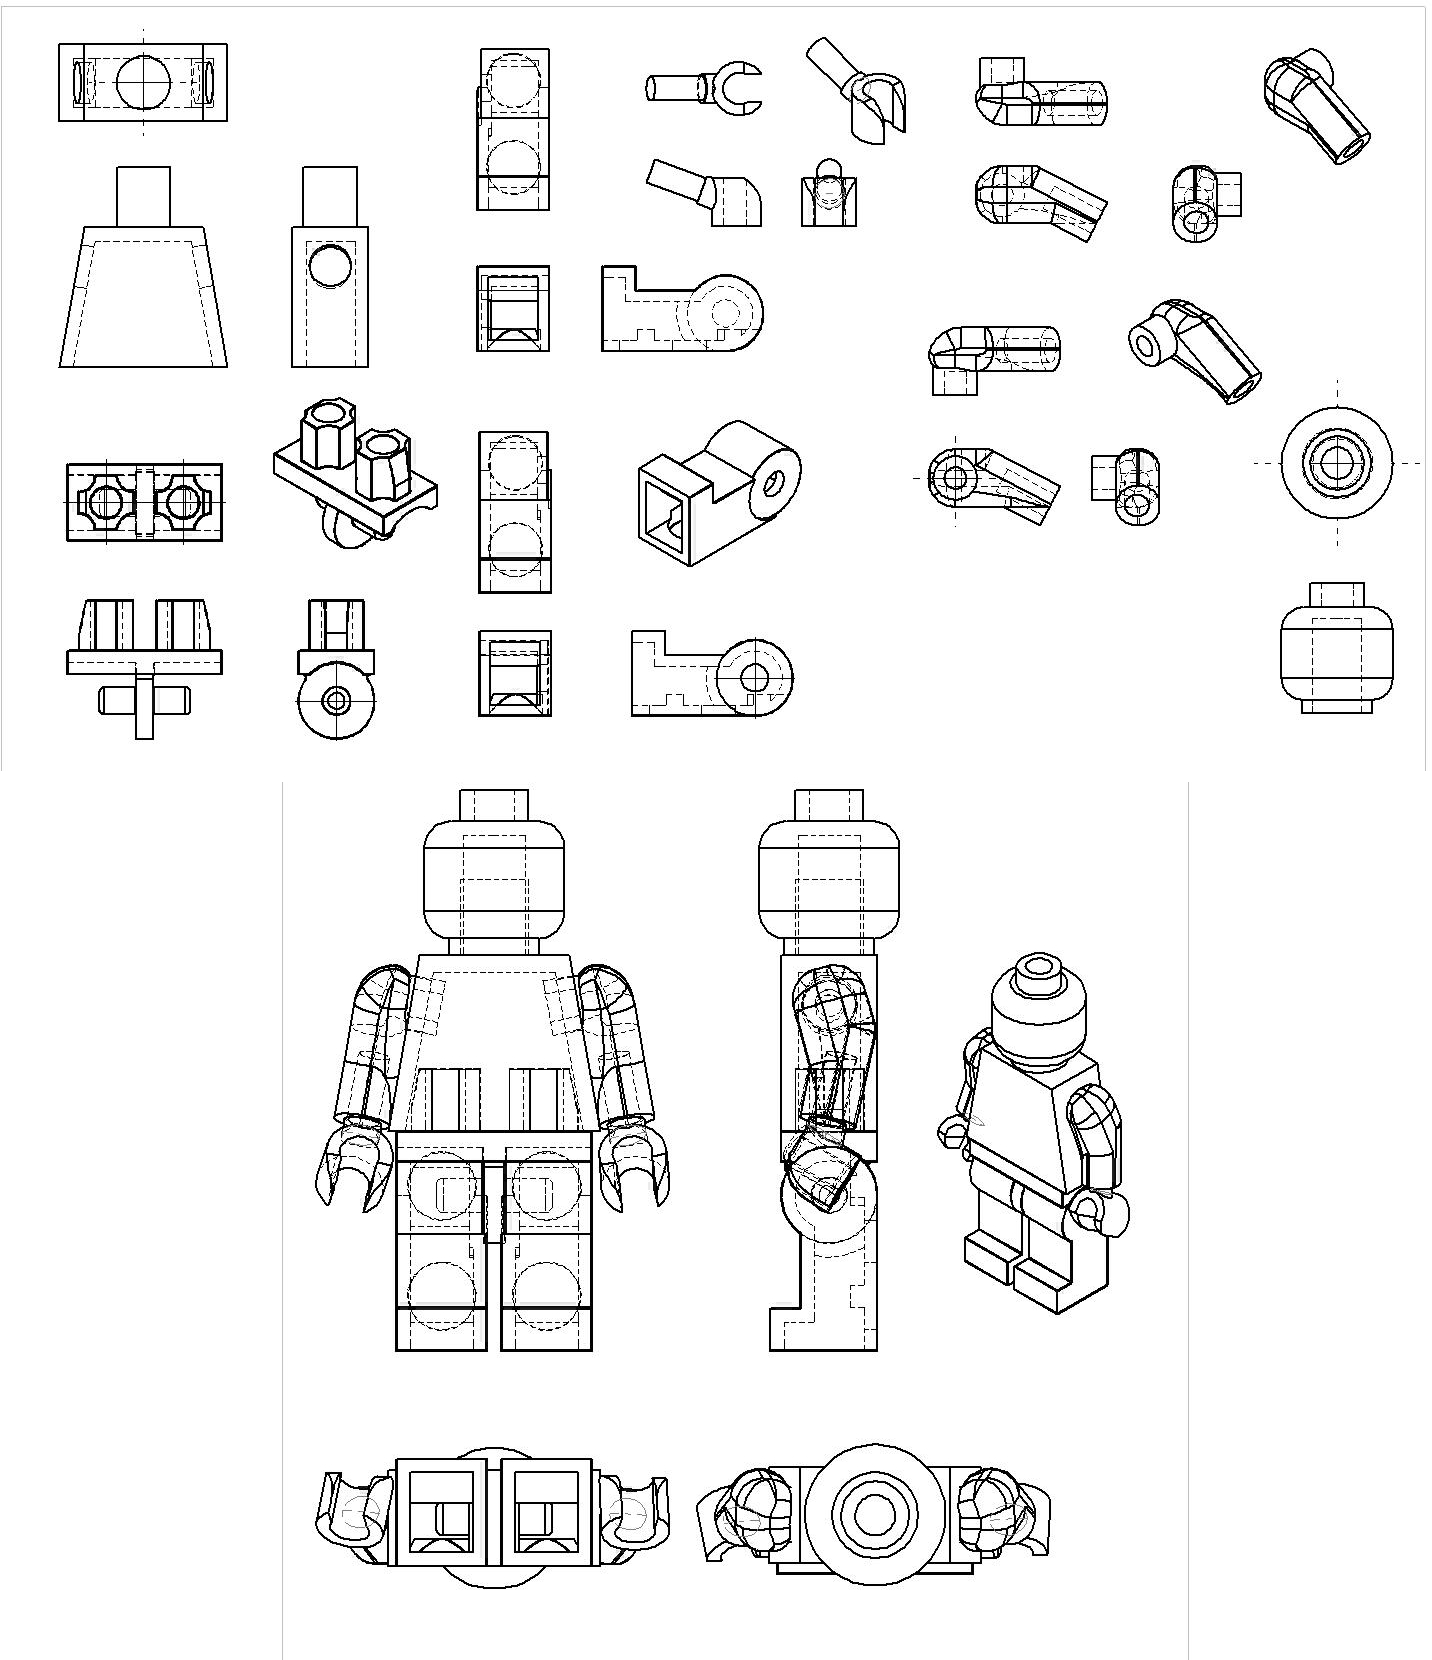 Need Basic LEGO character - Forum - The Free 3D Model Forum